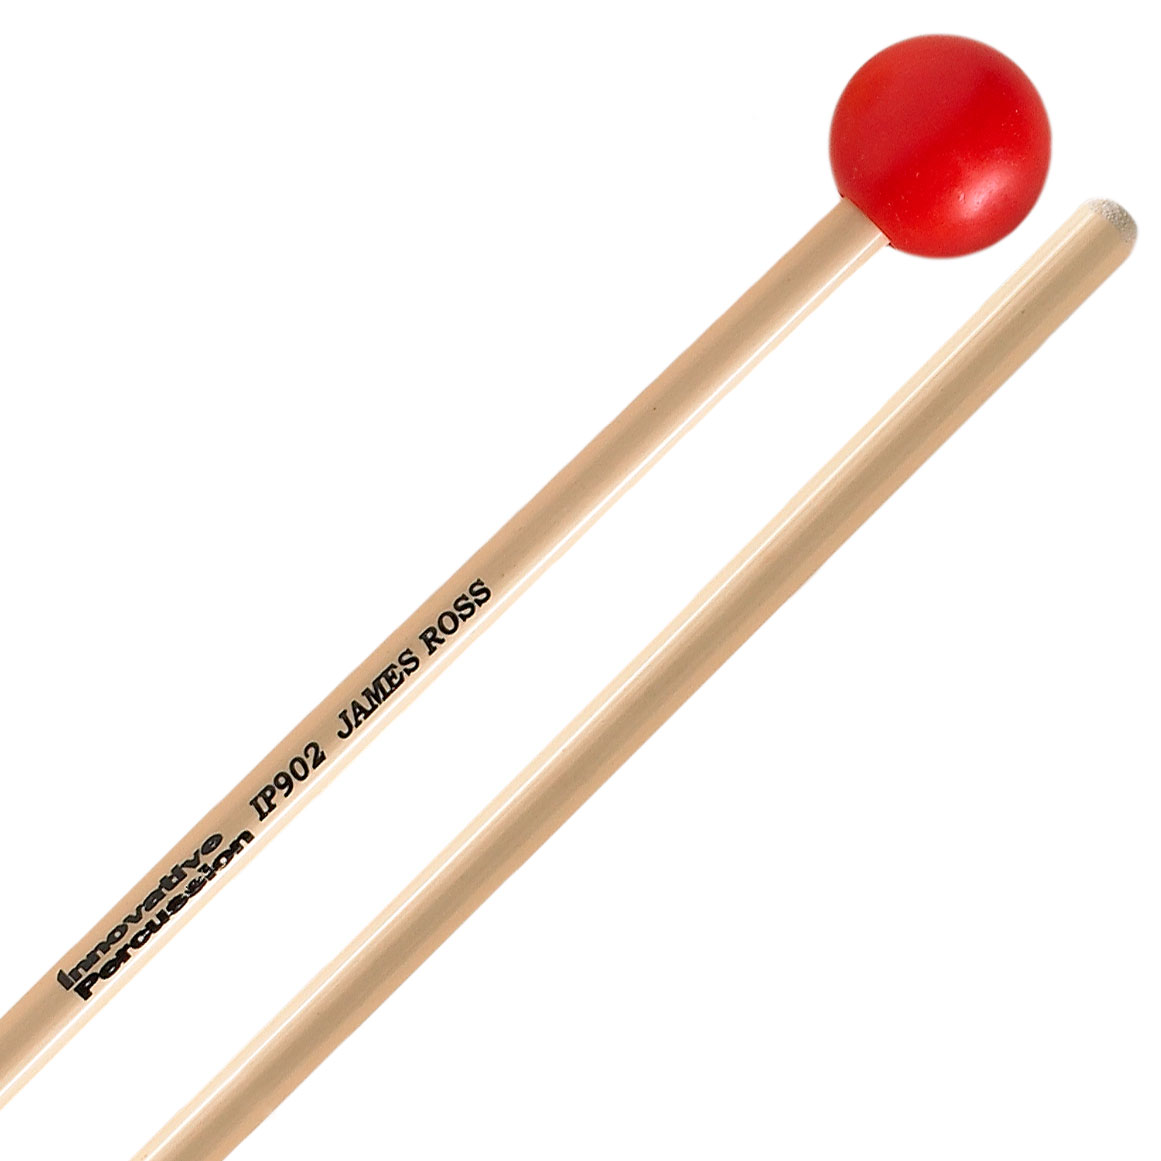 InnovativePercussion Xylophon Stick James Ross